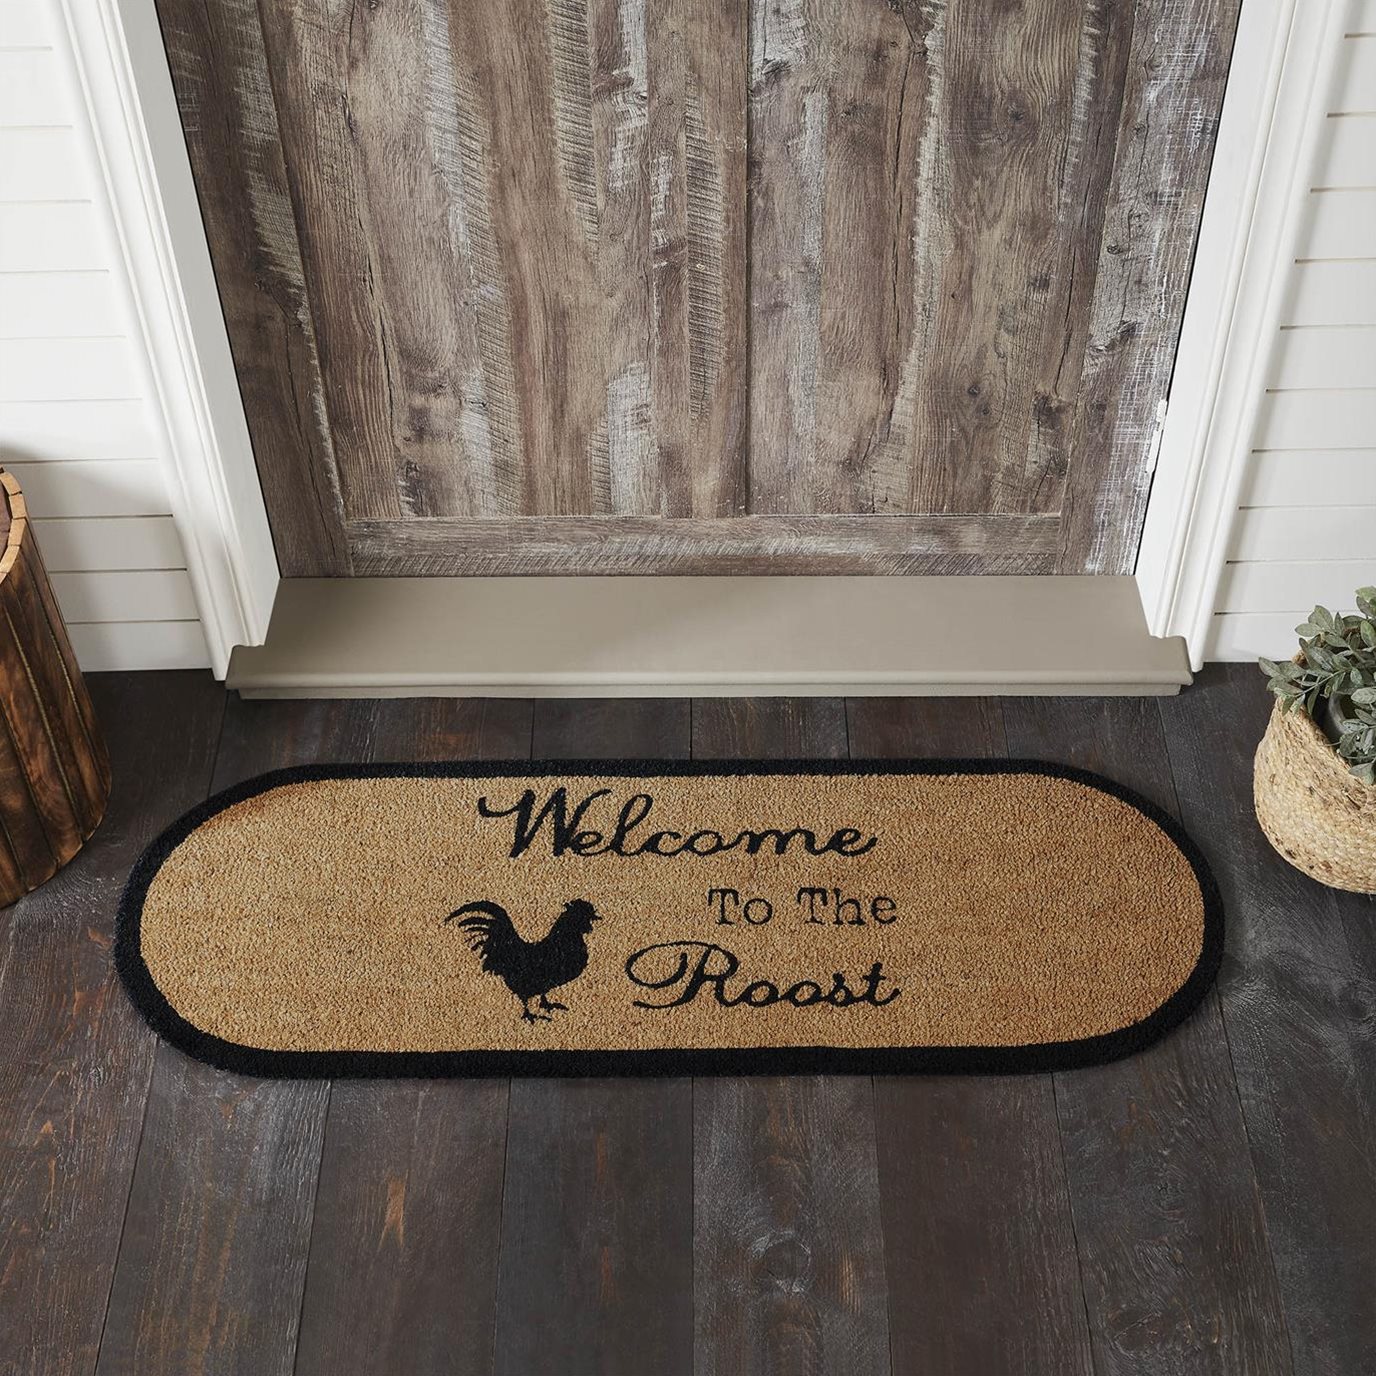 Down Home Welcome to the Roost Coir Rug Oval 17x48